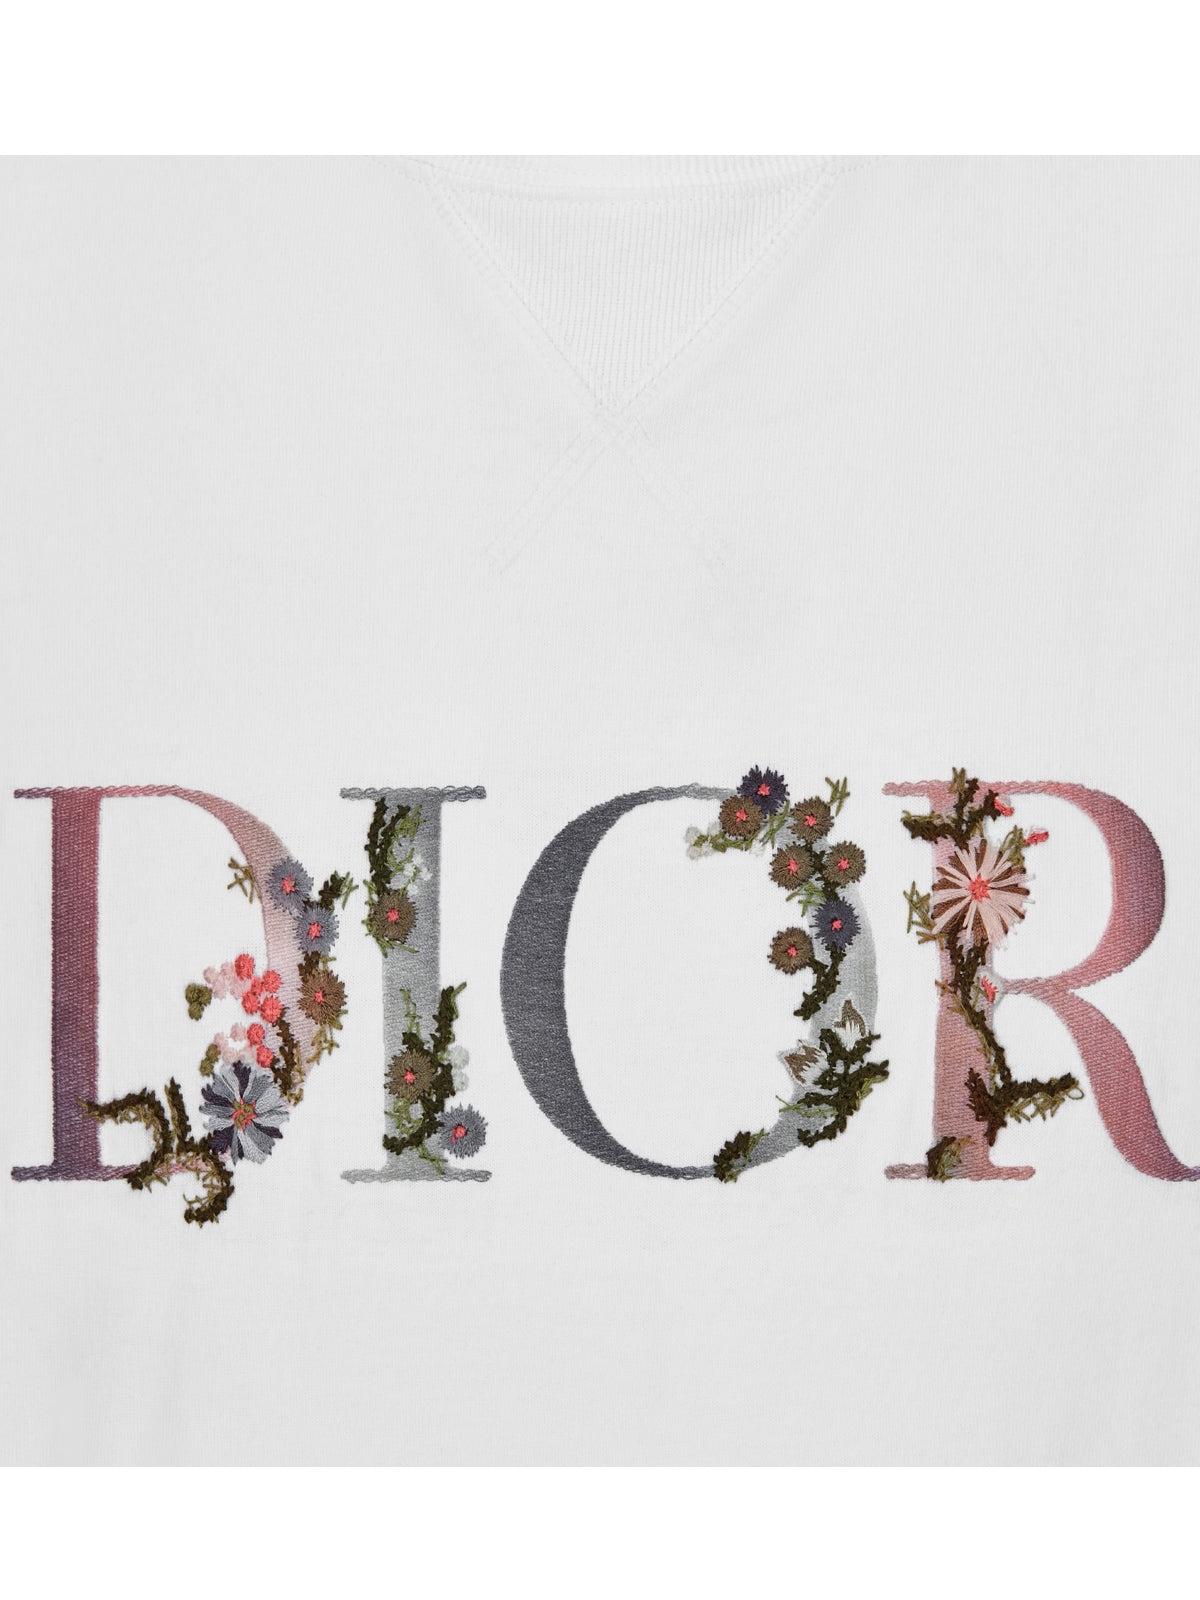 Dior T-shirt Dior Flowers Oversize in White for Men | Lyst